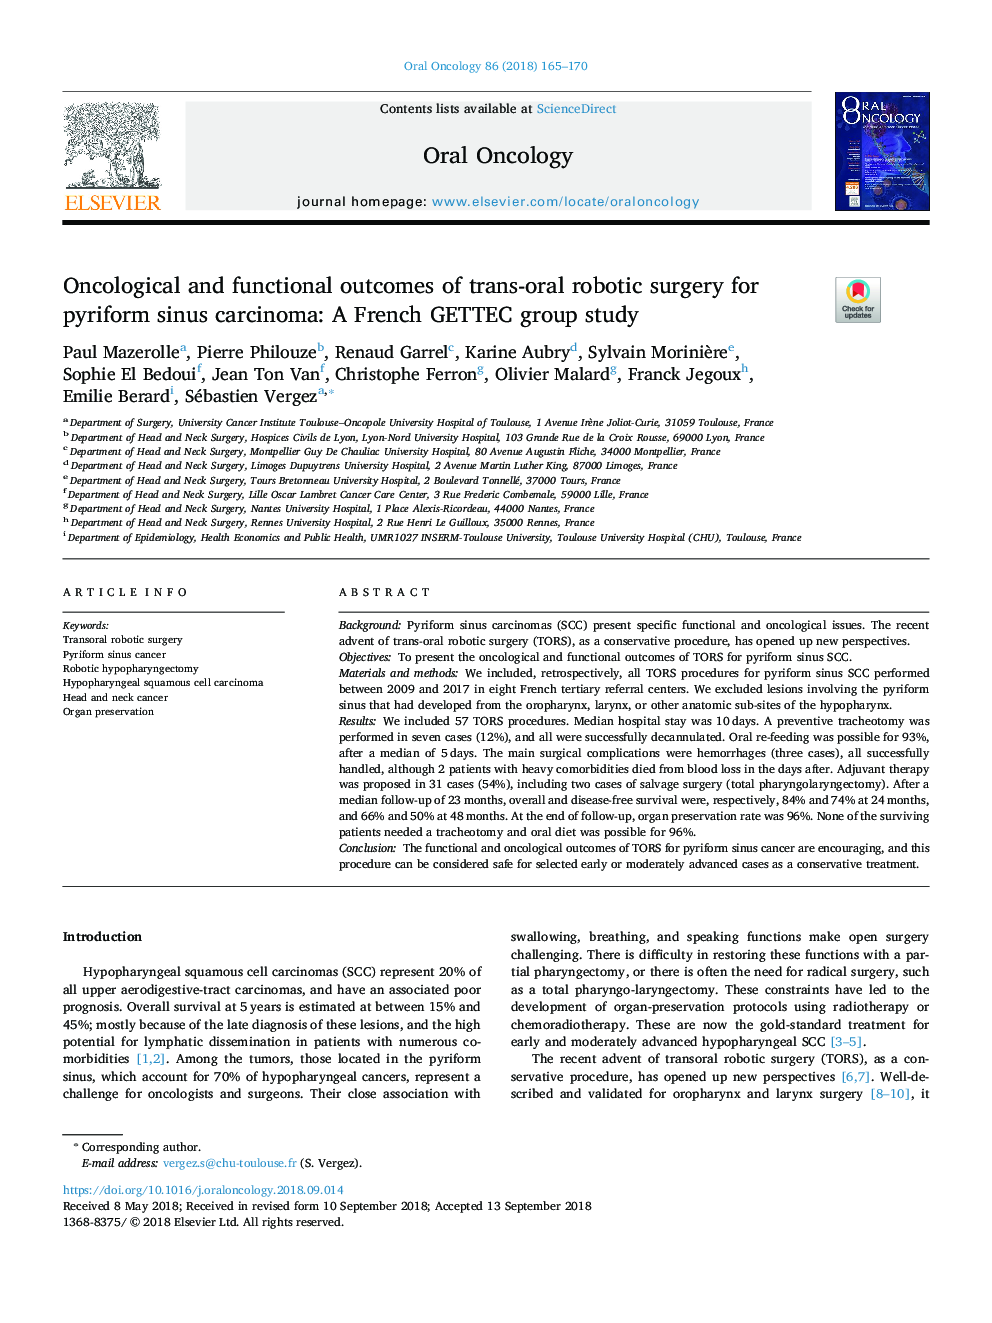 Oncological and functional outcomes of trans-oral robotic surgery for pyriform sinus carcinoma: A French GETTEC group study